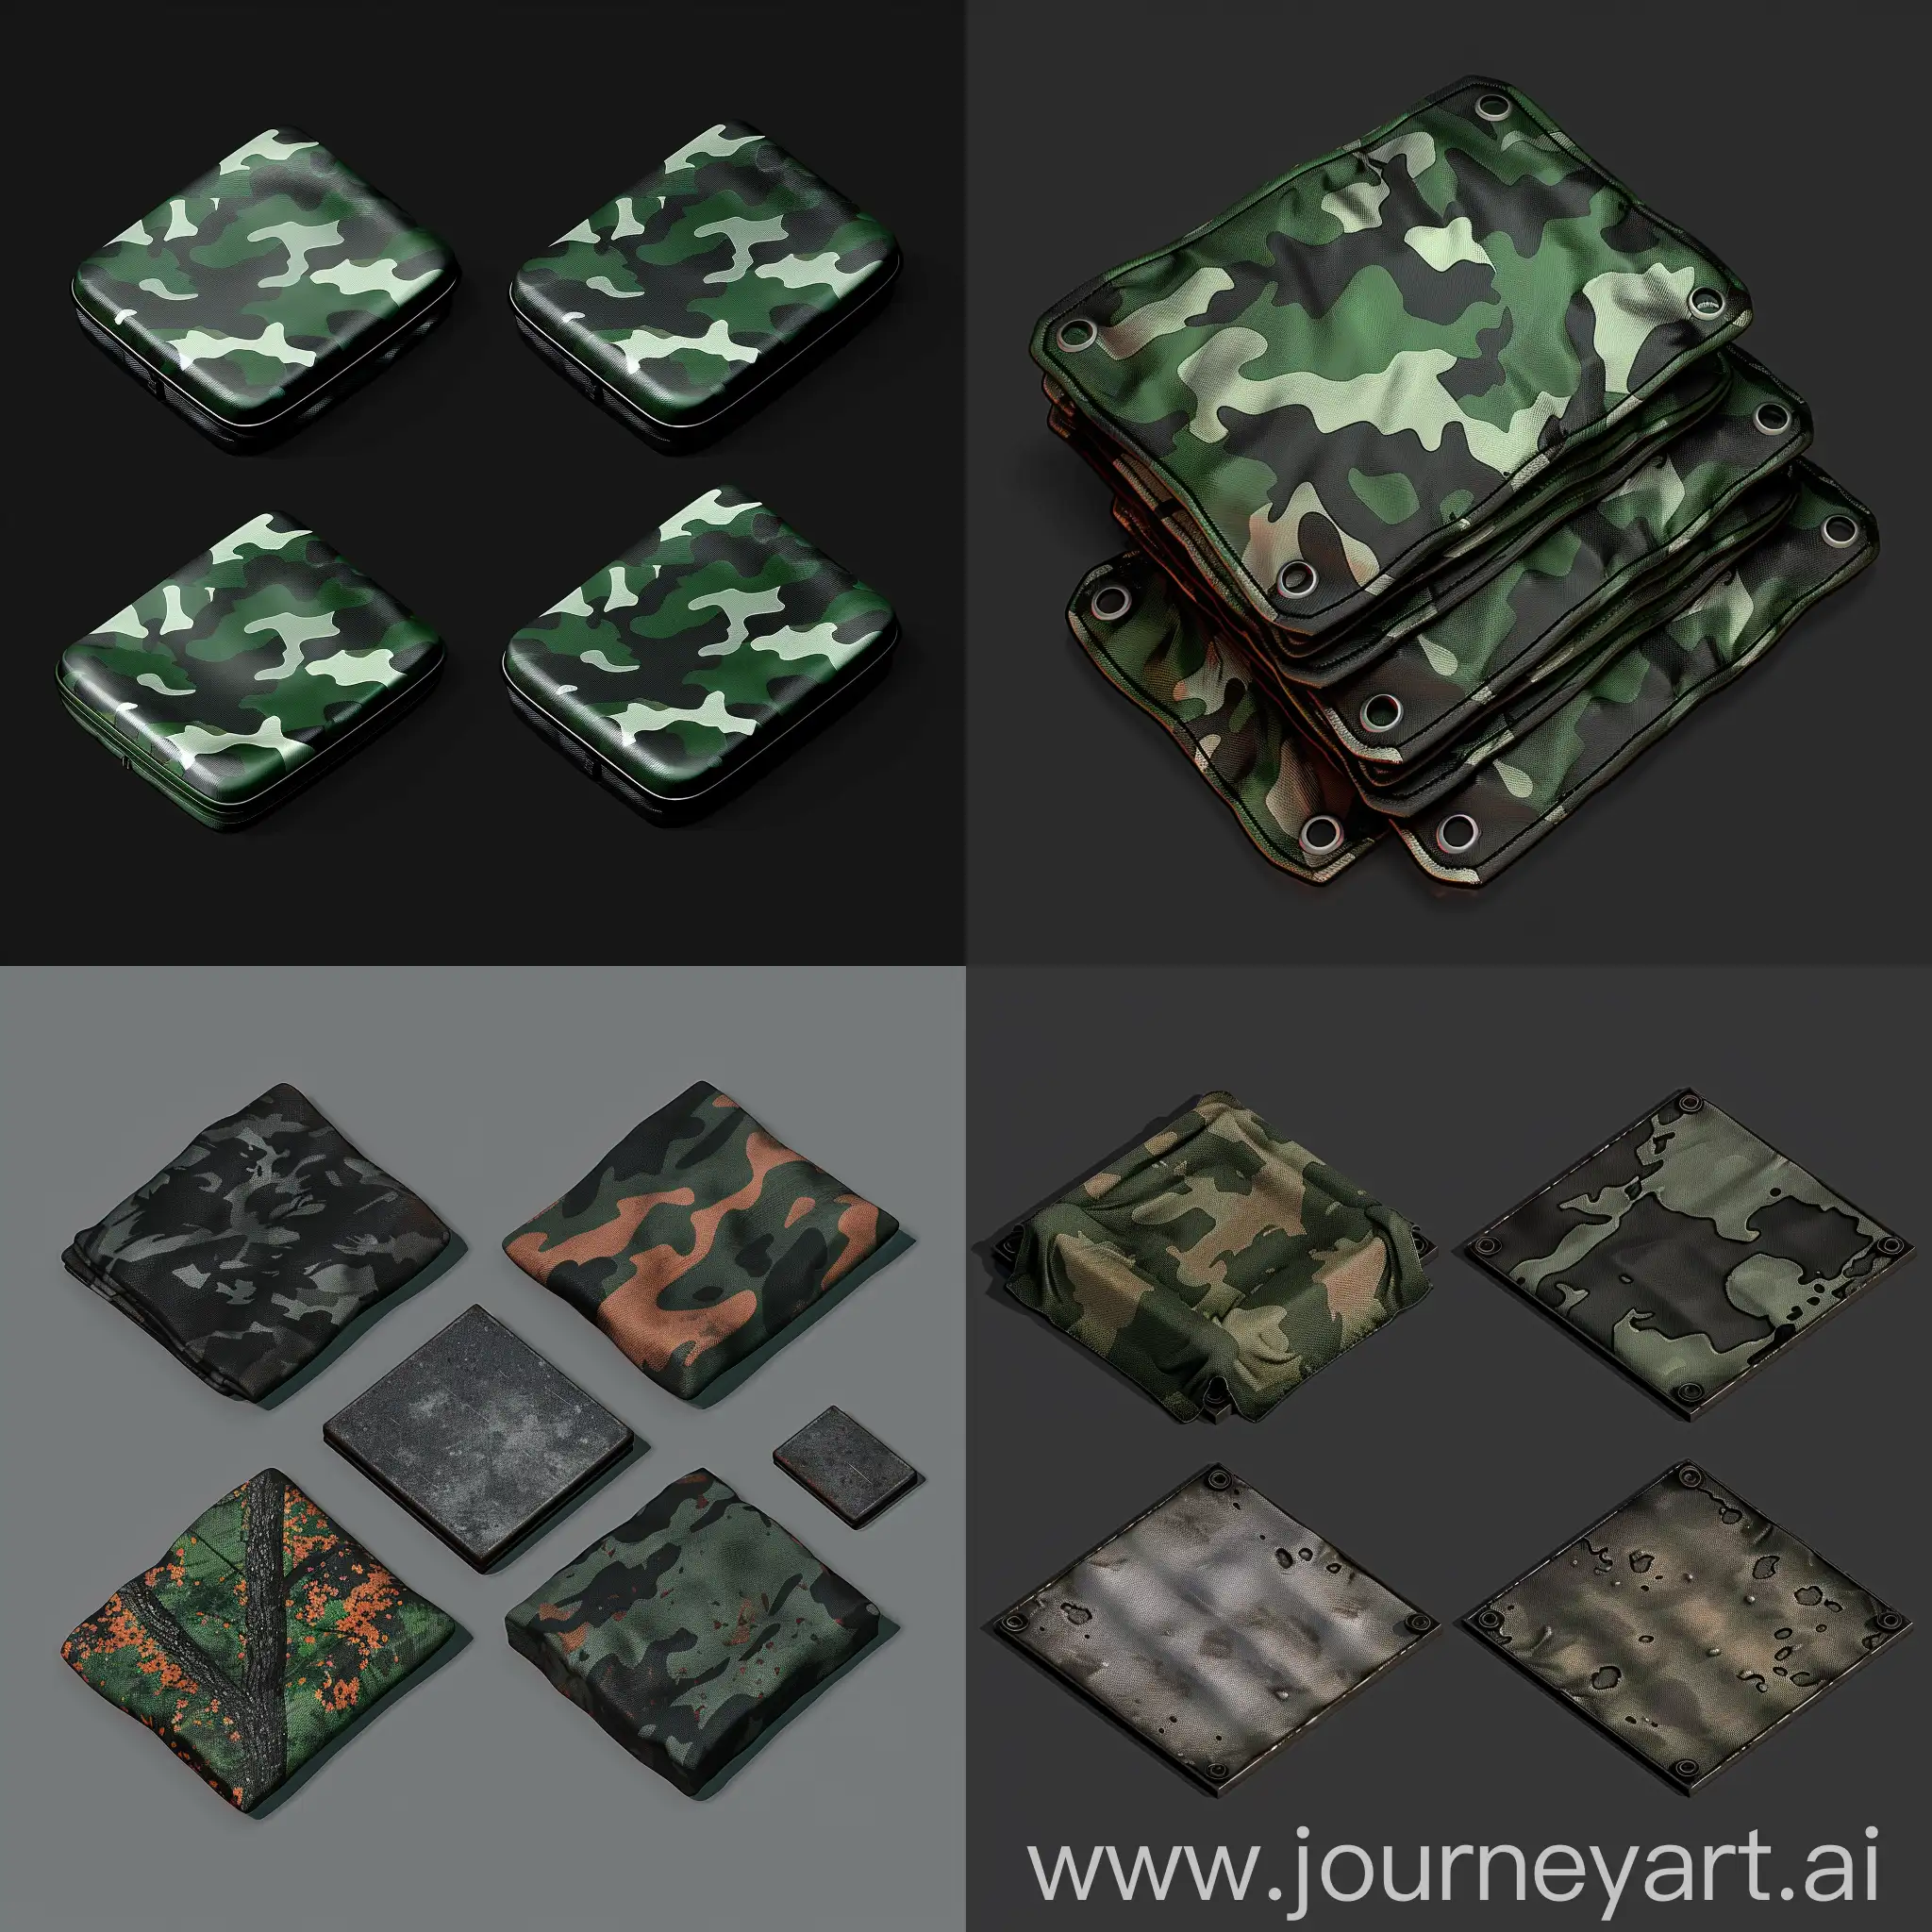 Isometric-Camo-Metal-Plate-Set-in-UltraRealistic-Unreal-Engine-5-Style